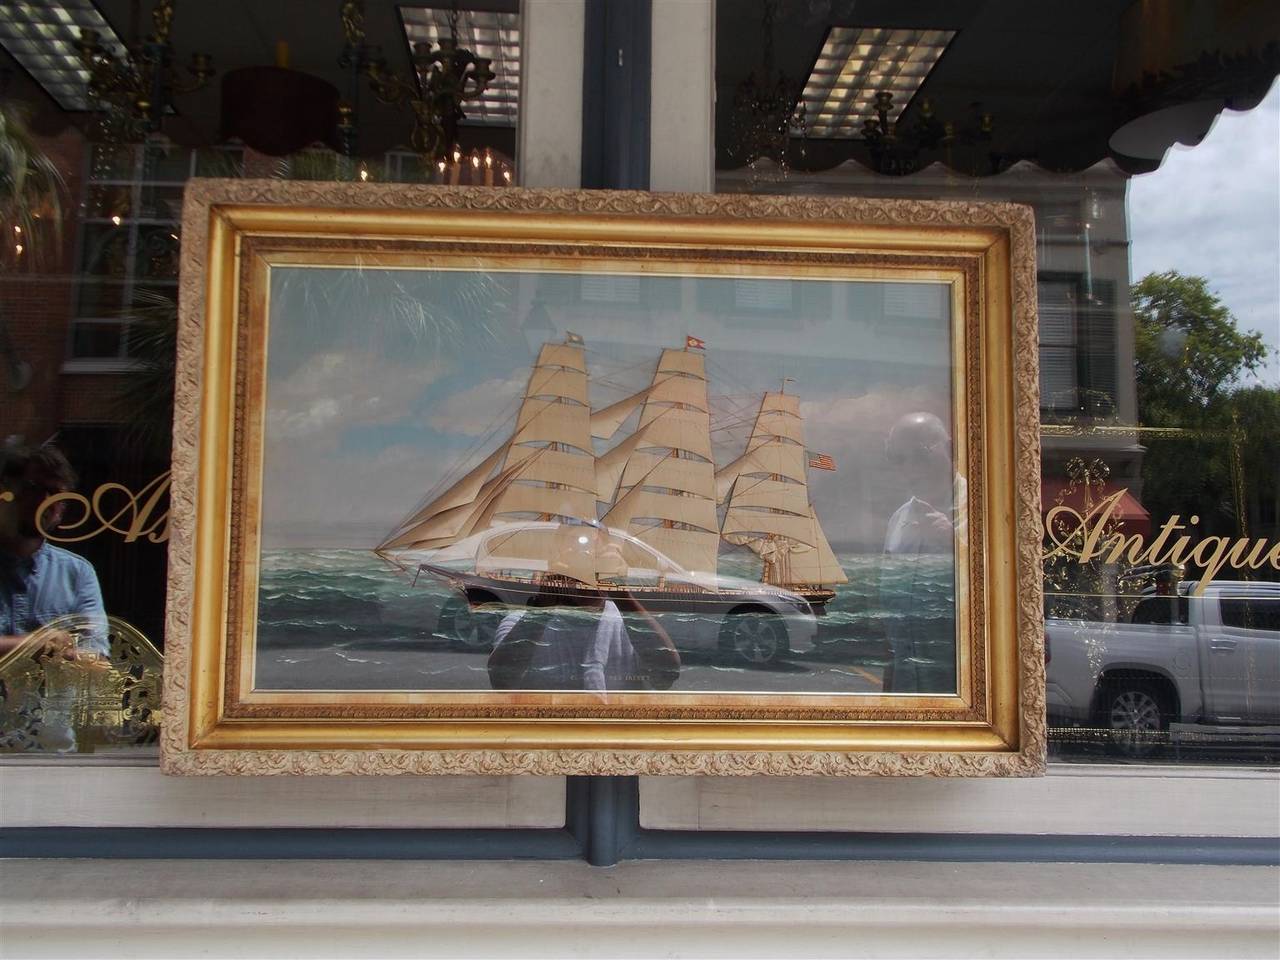 The clipper ship Red Jacket, named after a Native American Chief of the Seneca Tribe, was unquestionably the sharpest, fastest and best looking of the Maine fleet of sail vessels. Chief Otetiani, also called Sagoyewatha, which in native language